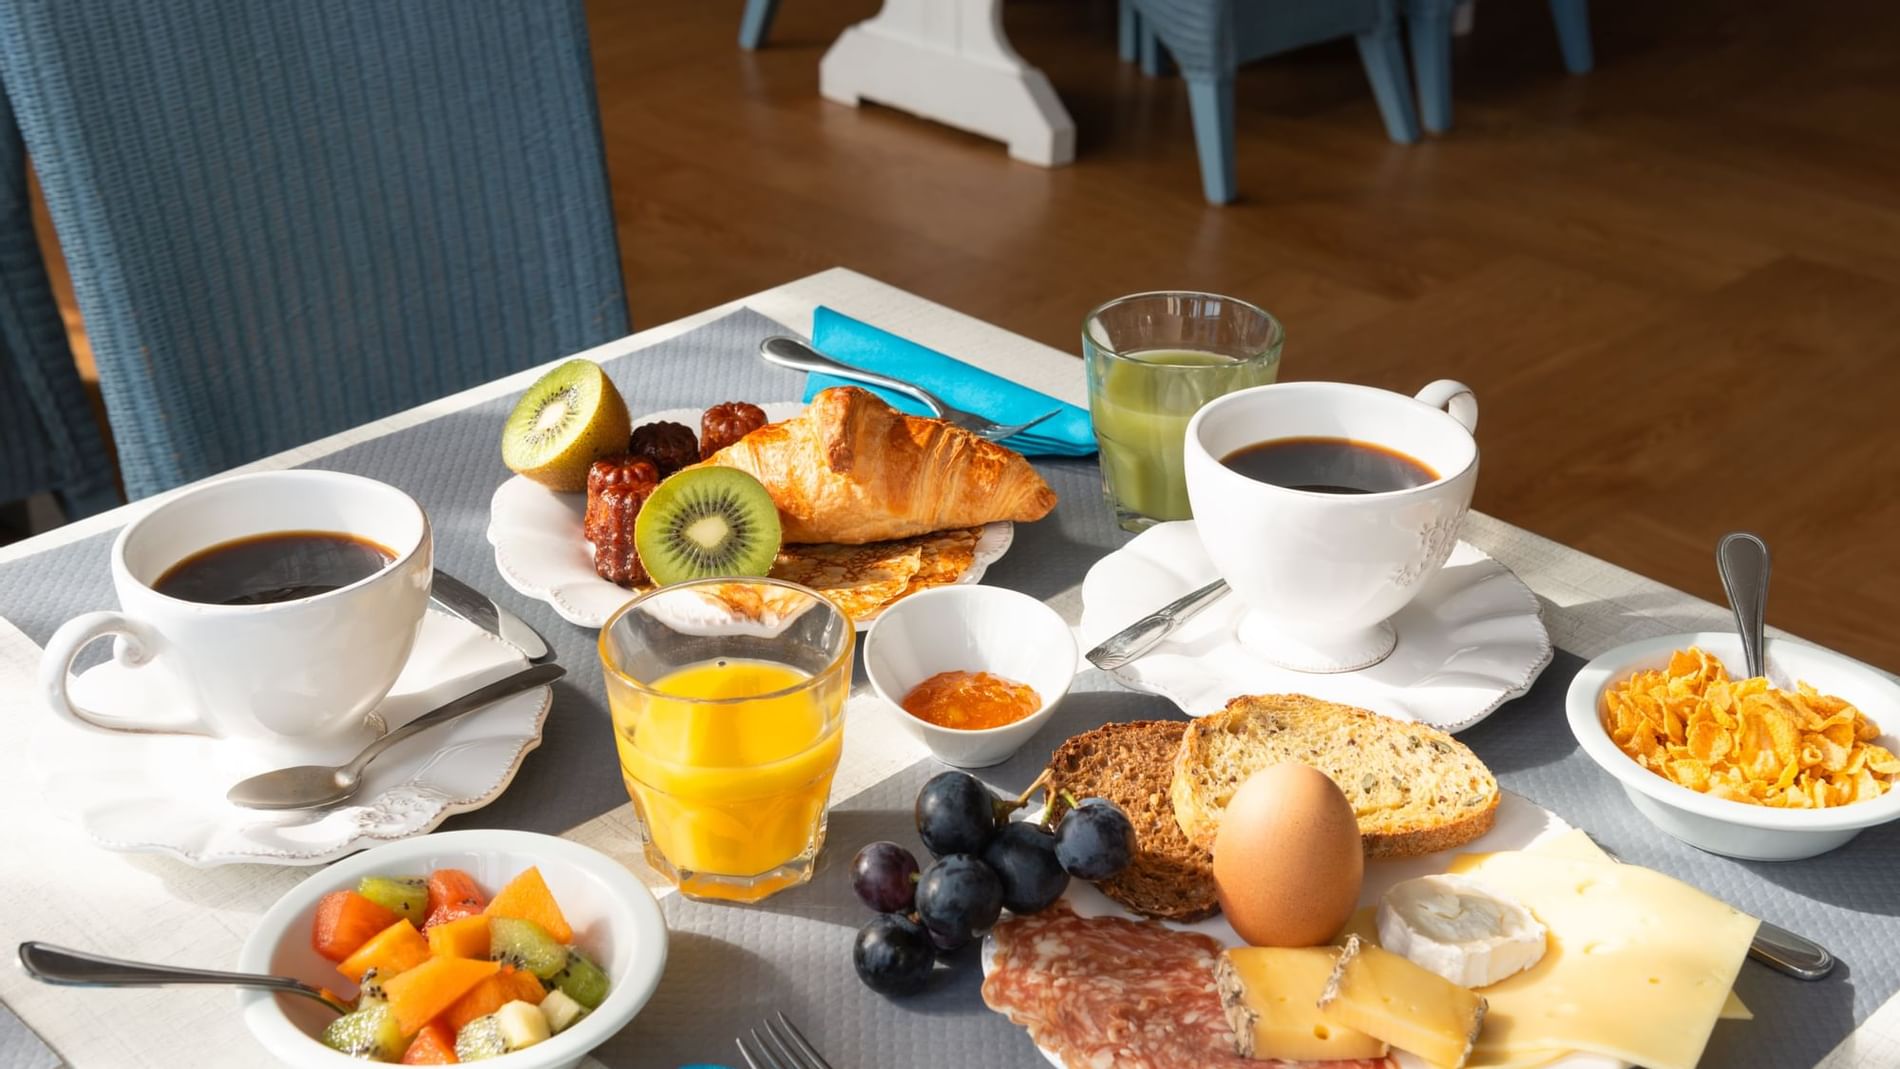 Breakfast with pastry, fruits & drinks at The Originals Hotels